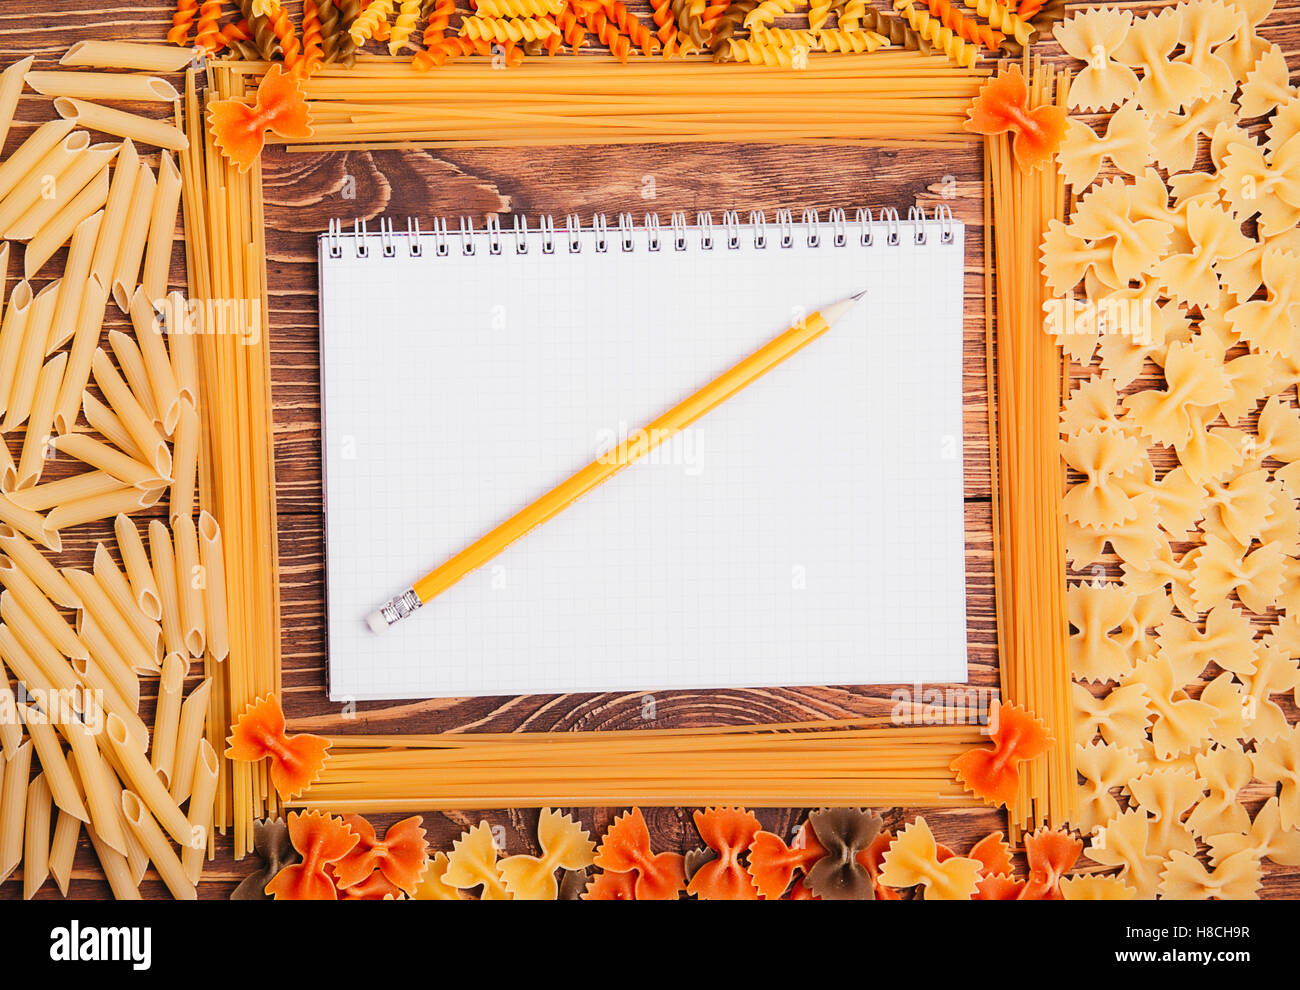 Pencil lying on a book of recipes frame of pasta on a wooden retro background Stock Photo